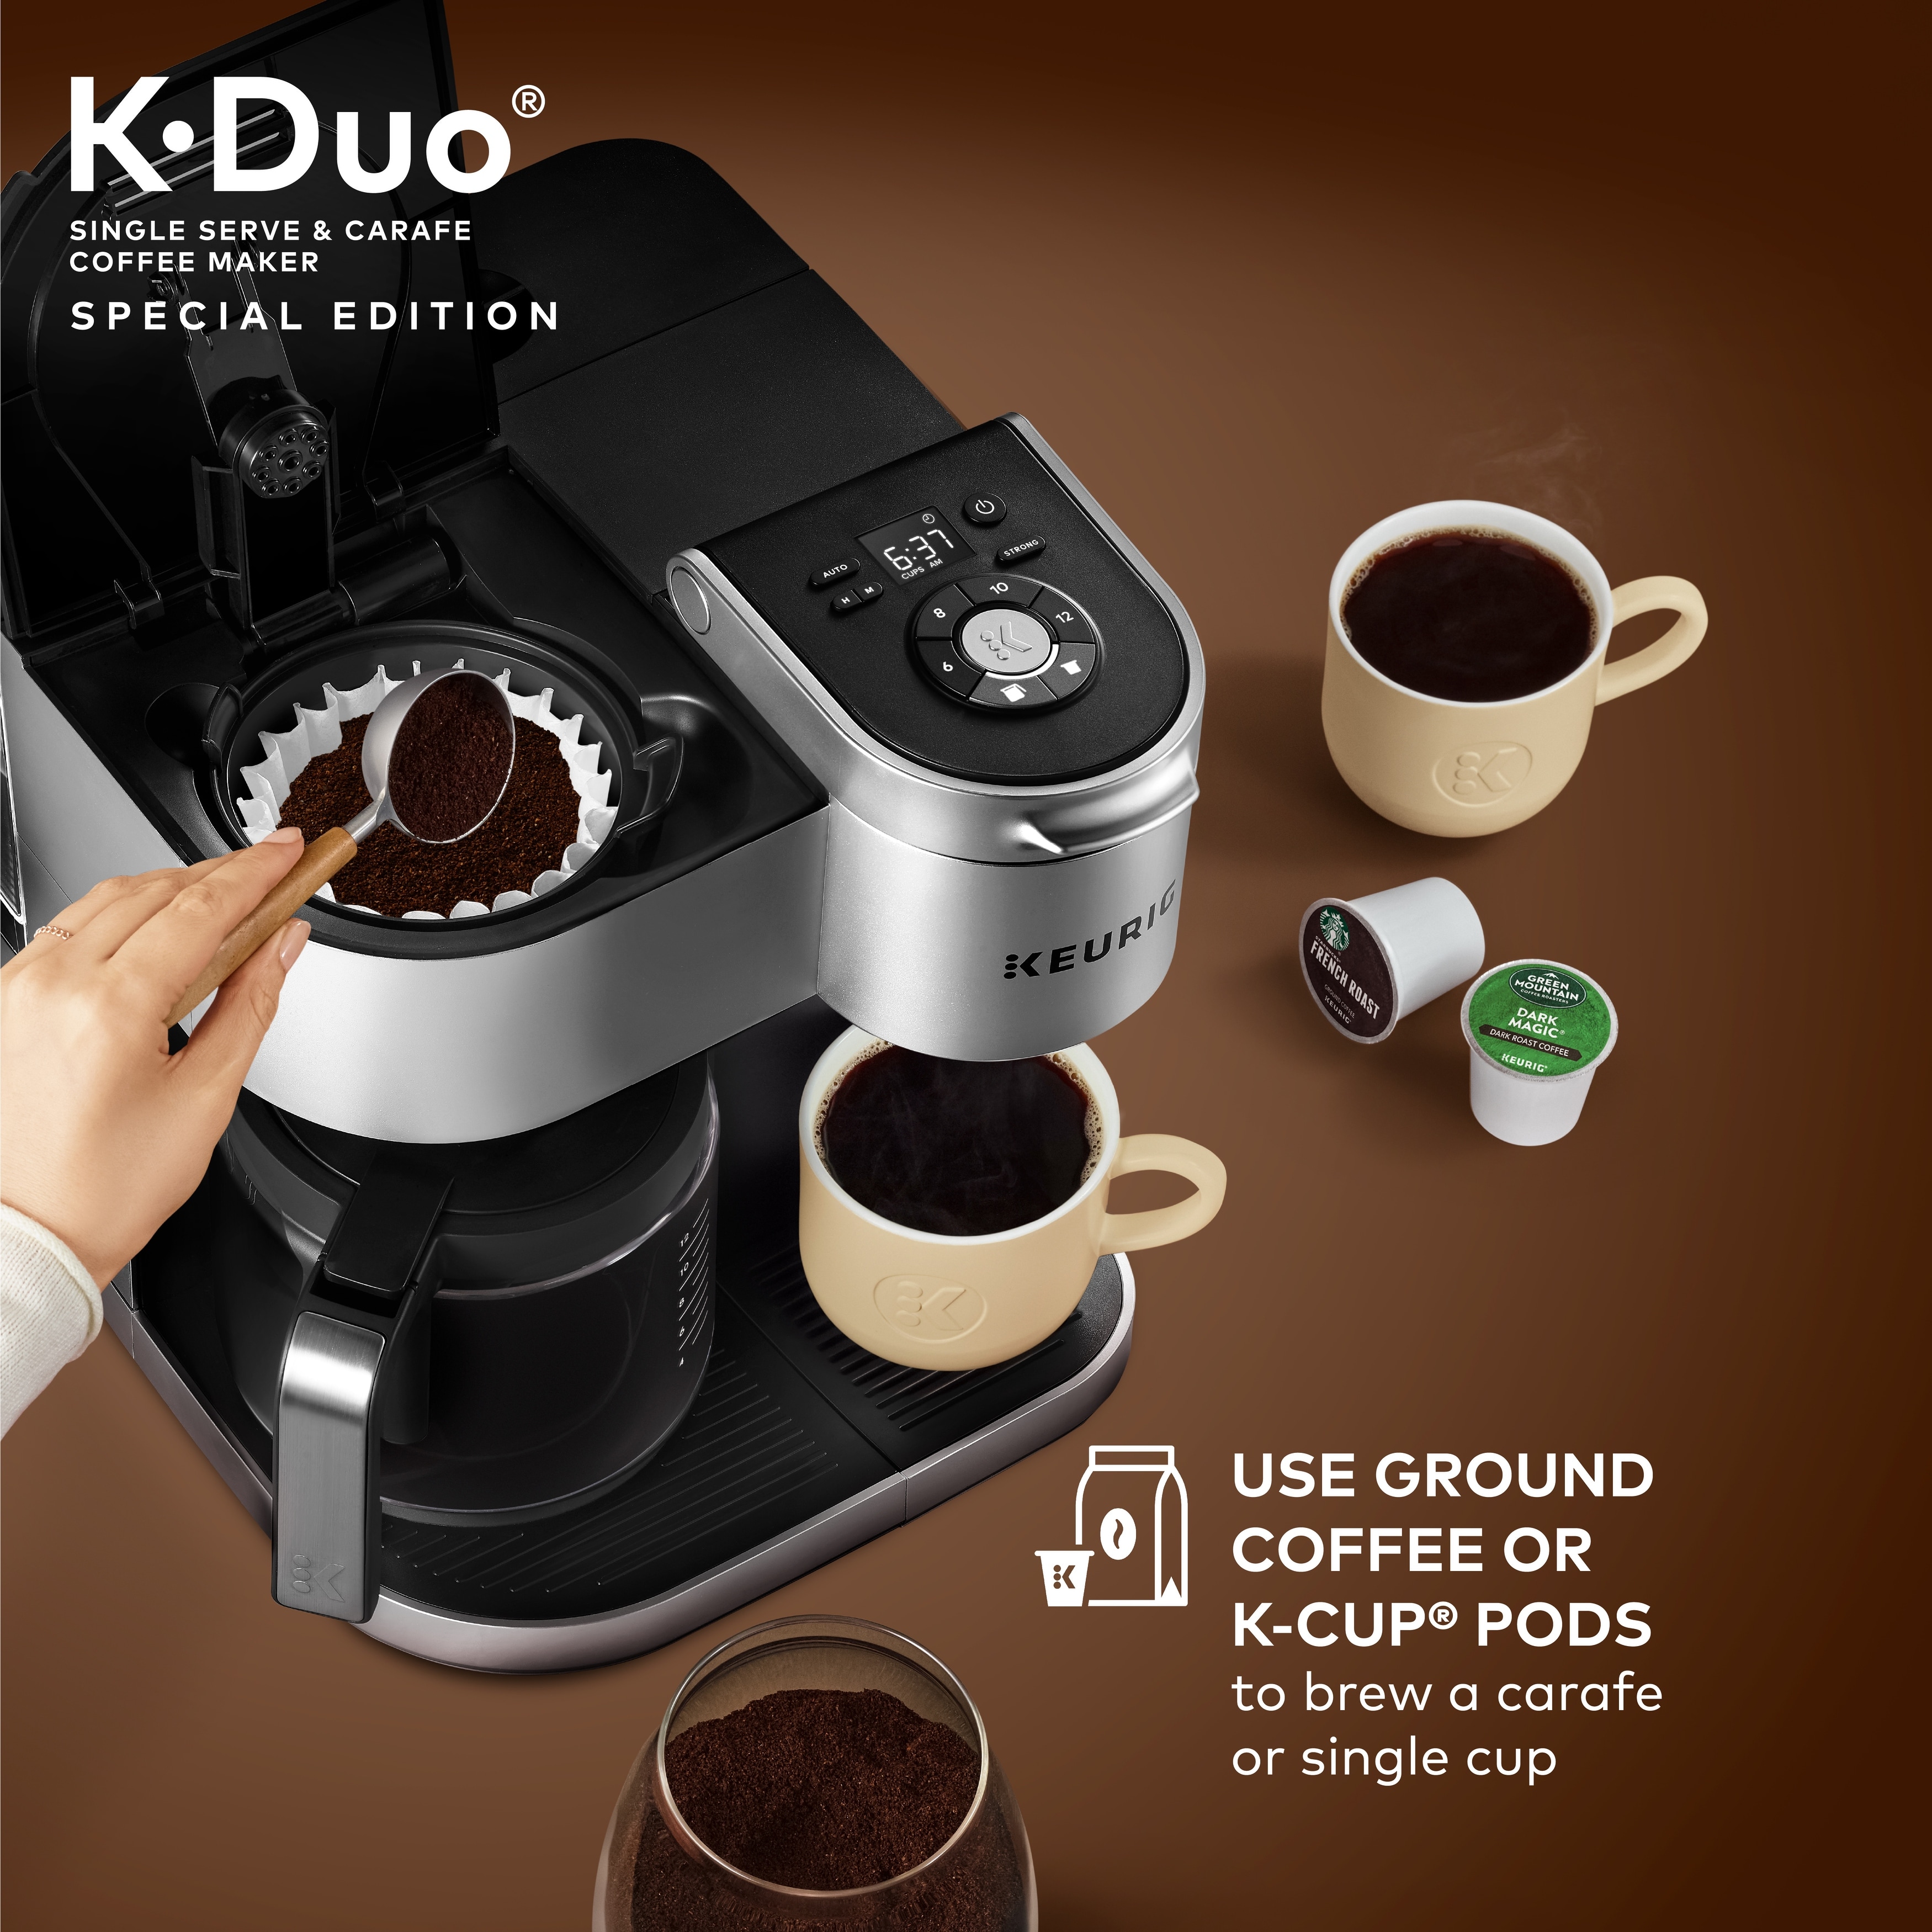 https://ak1.ostkcdn.com/images/products/is/images/direct/455df0671f672a12d71a0c1b87503b962b4c973d/Keurig%C2%AE-K-Duo%C2%AE-Special-Edition-Single-Serve-%26-Carafe-Coffee-Maker.jpg